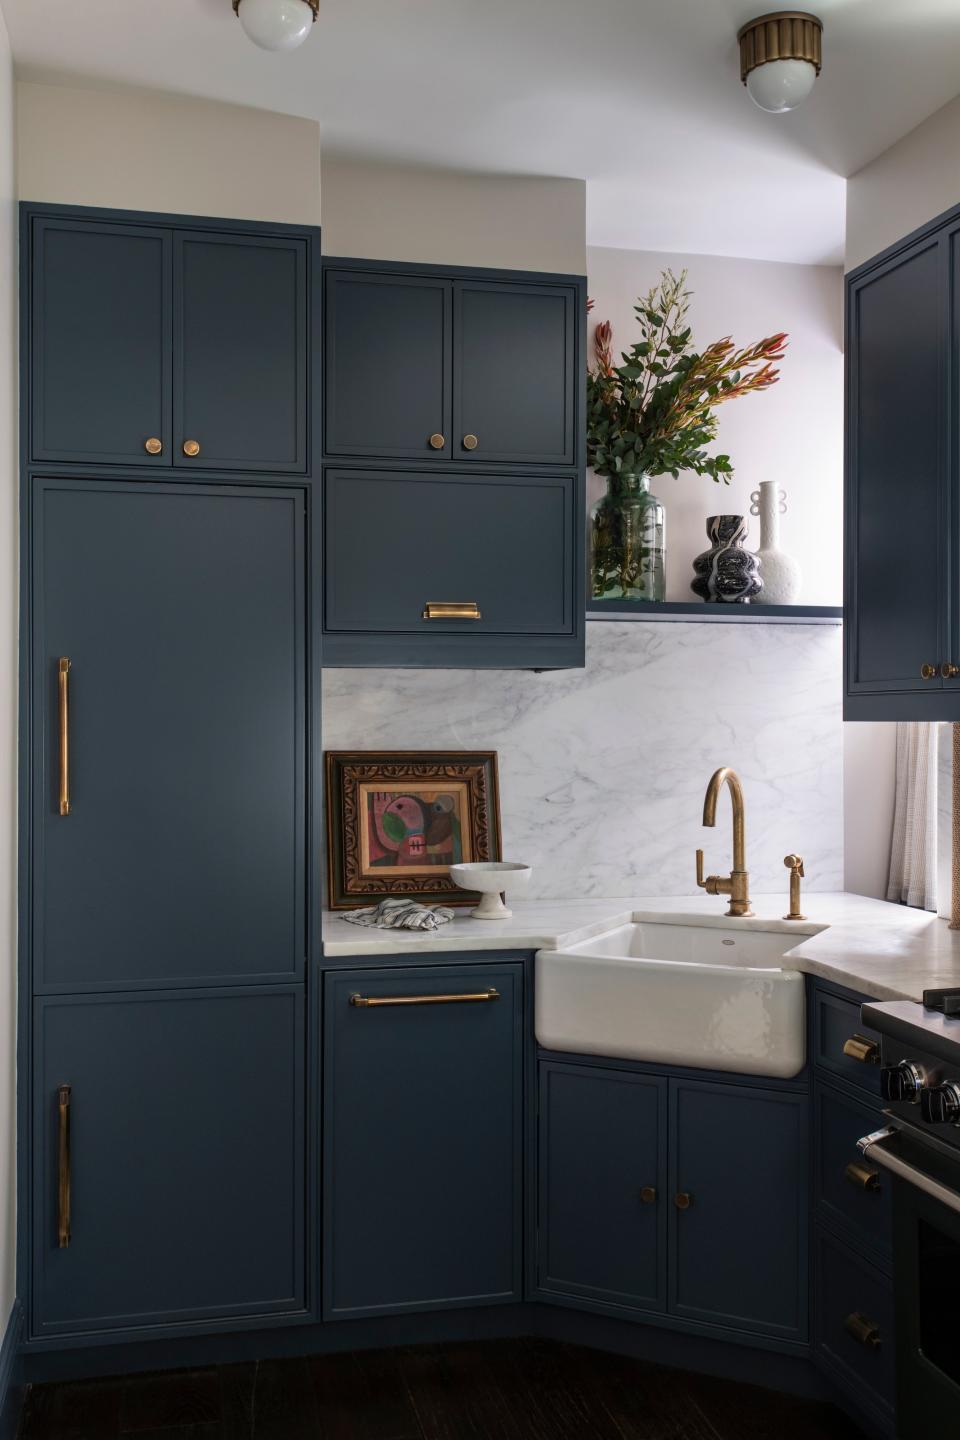 AFTER: Louise steeped the kitchen in calm and color by way of deep teal cabinets and a pristine marble backsplash. She added some shine with burnished knobs and pulls by Classic Brass. A Pedro Coronel painting sits on the counter.